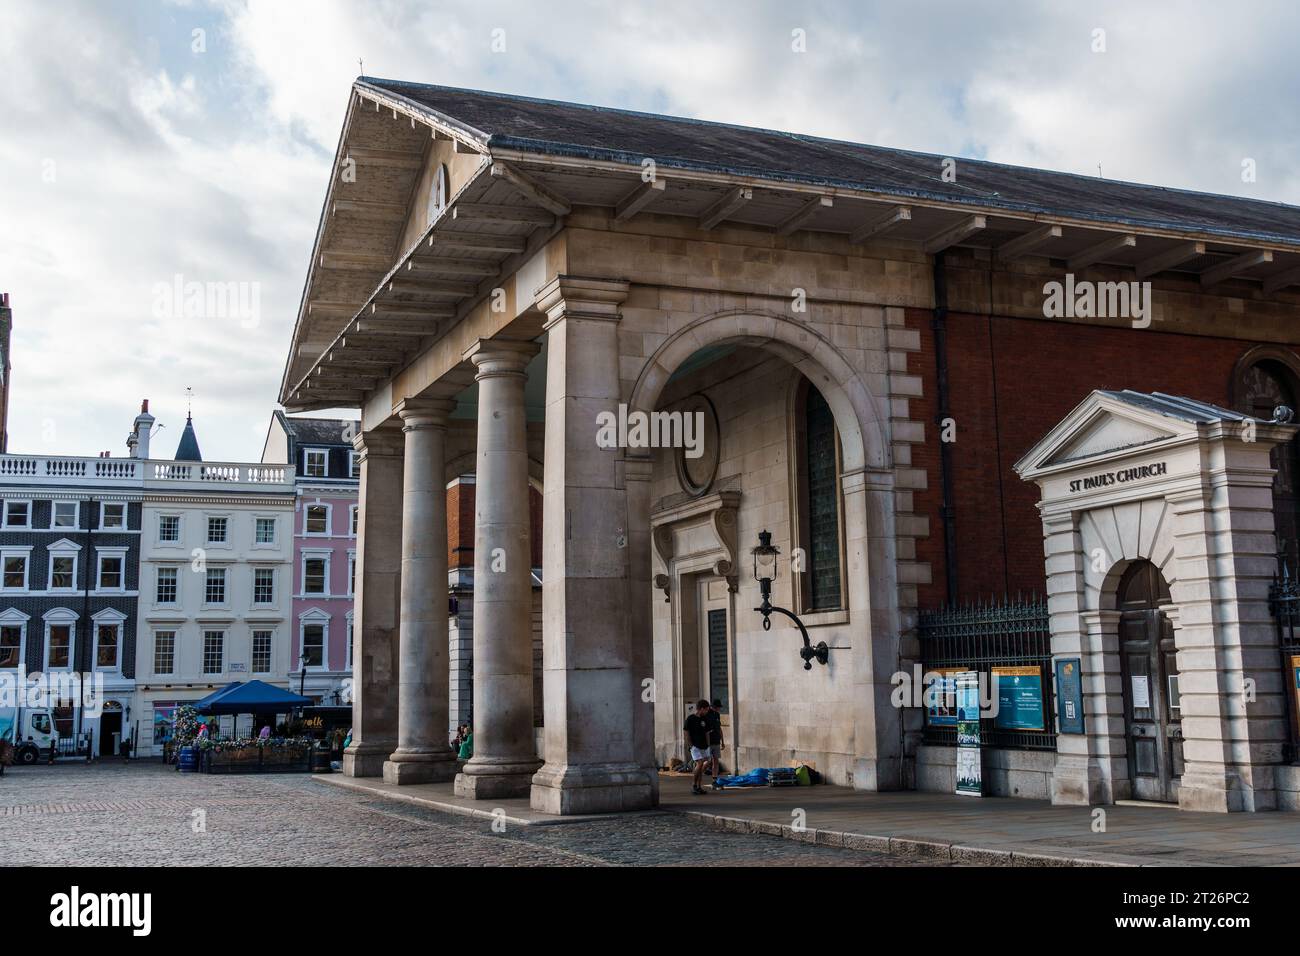 LONDON, UK - August 25, 2023: St Pauls Church Covent Garden. Located in the West End of London, Covent Garden is renowned for its luxury fashion and b Stock Photo